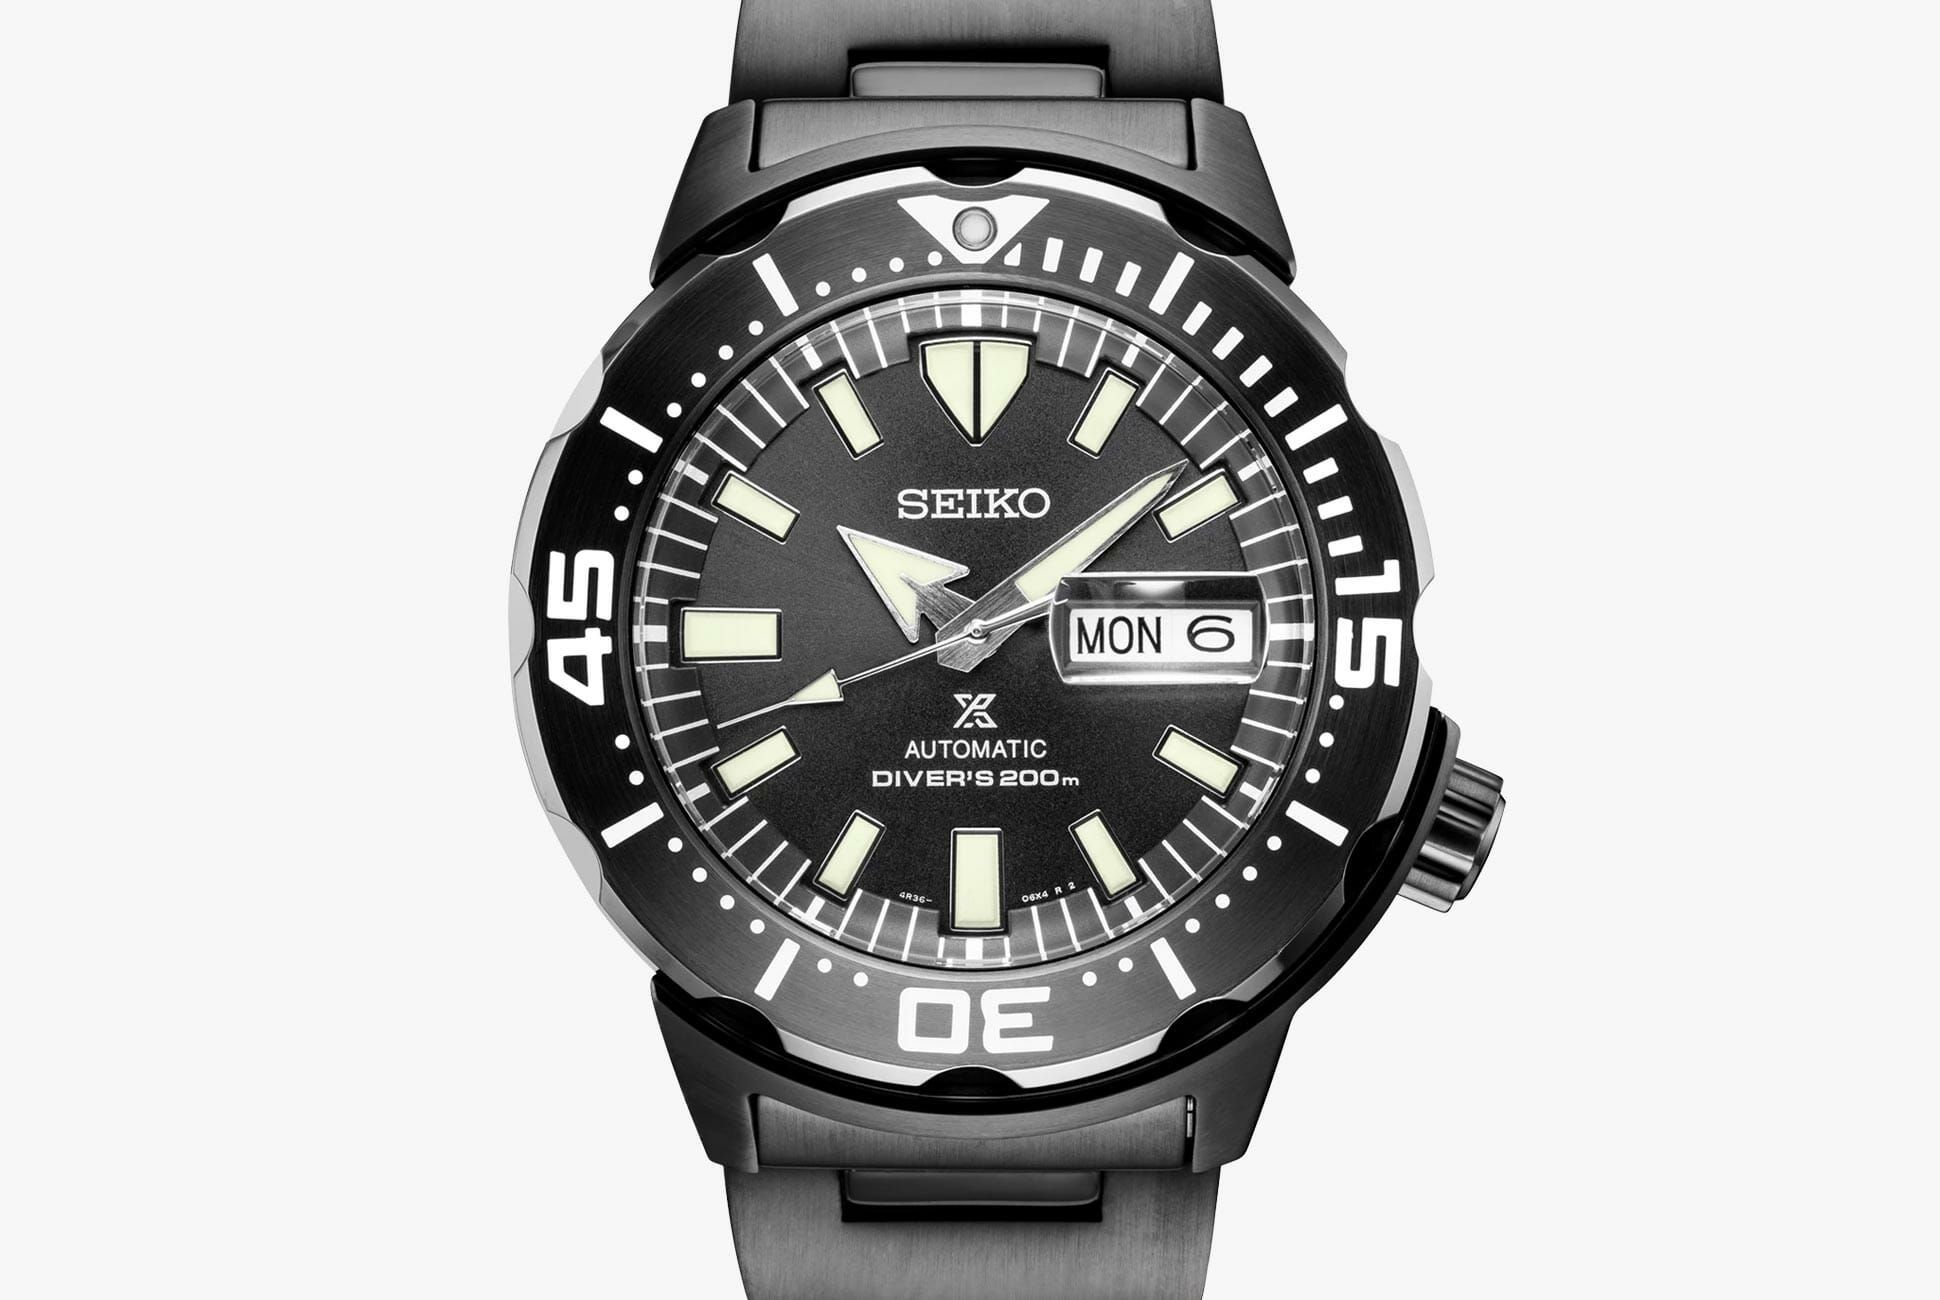 This All-Black, Seiko Dive Is a Rugged Beast